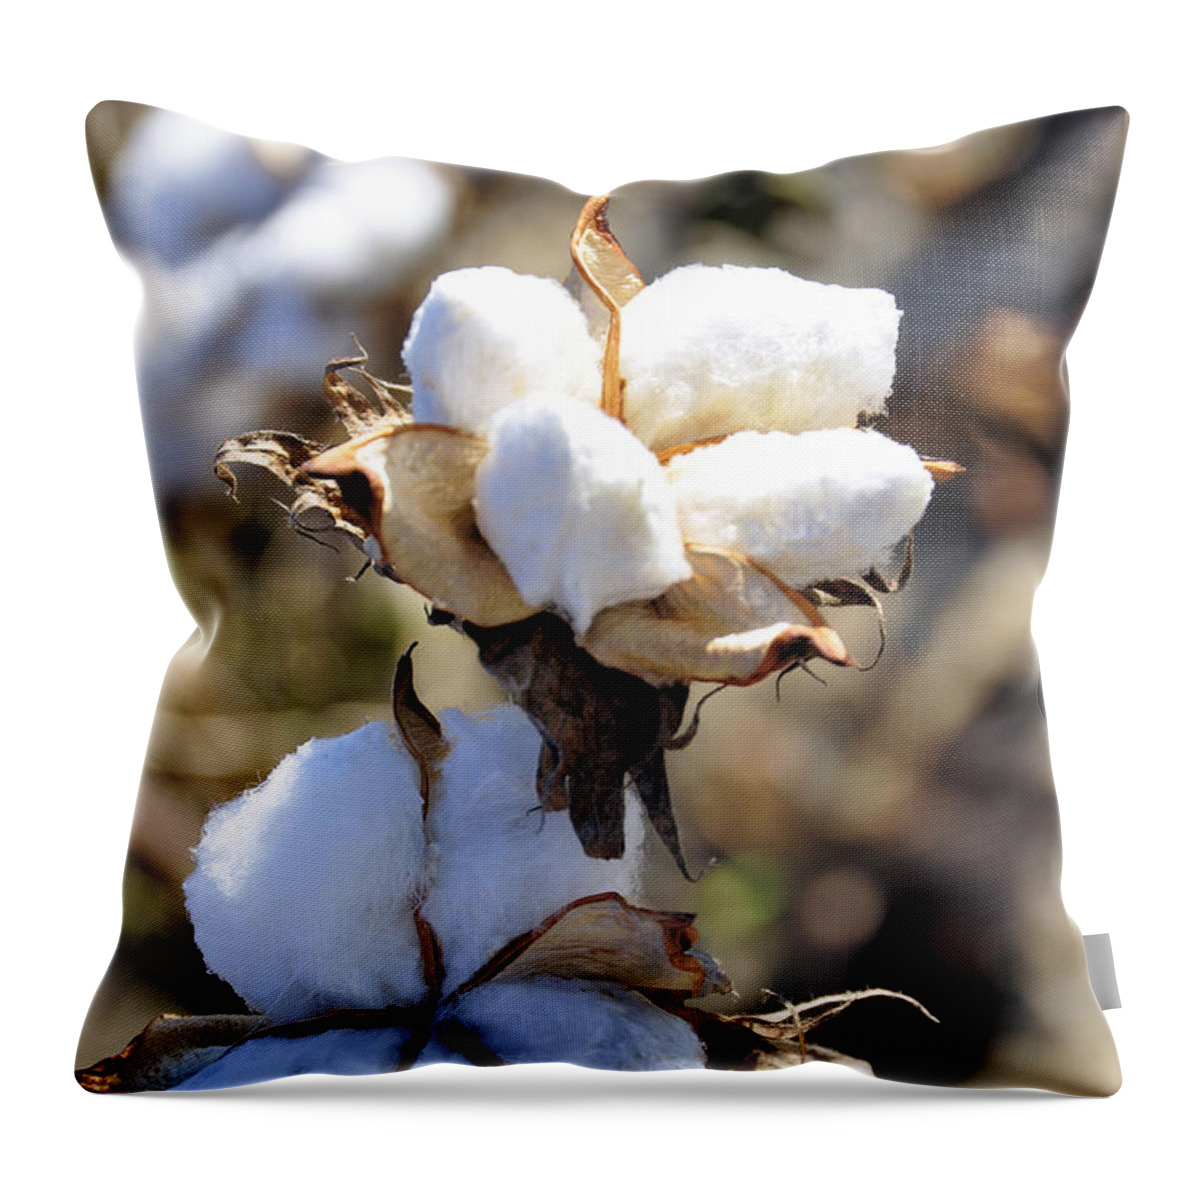 Still Life Throw Pillow featuring the photograph The Cotton Is Ready by Jan Amiss Photography